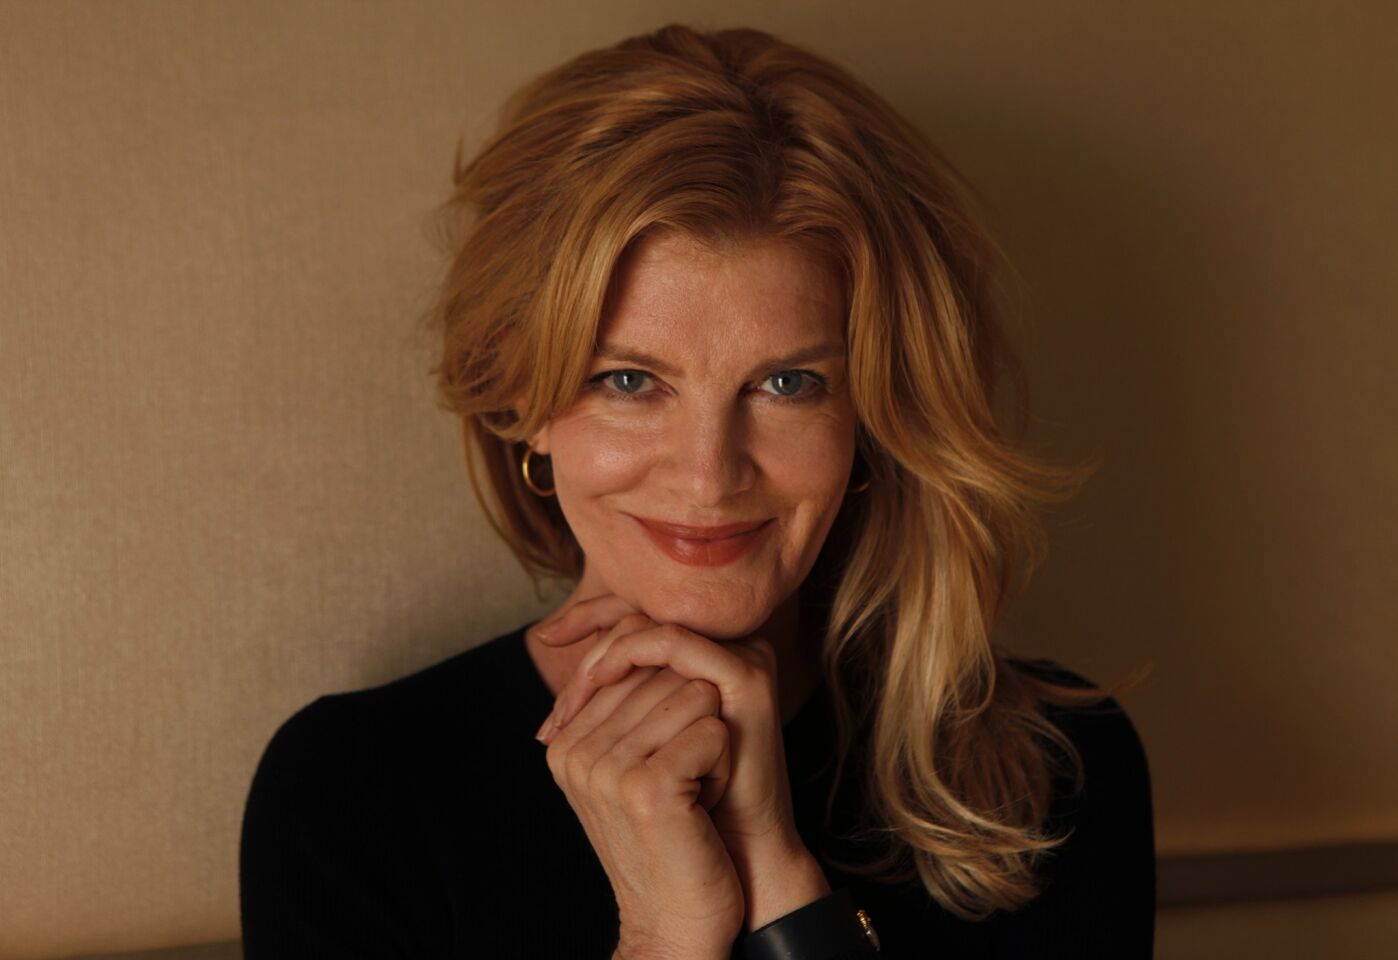 Rene Russo, who appears in the crime thriller "Nightcrawler," apparently has never been a big fan of performing in films. "Nightcrawler" was written and directed by her husband, Dan Gilroy.